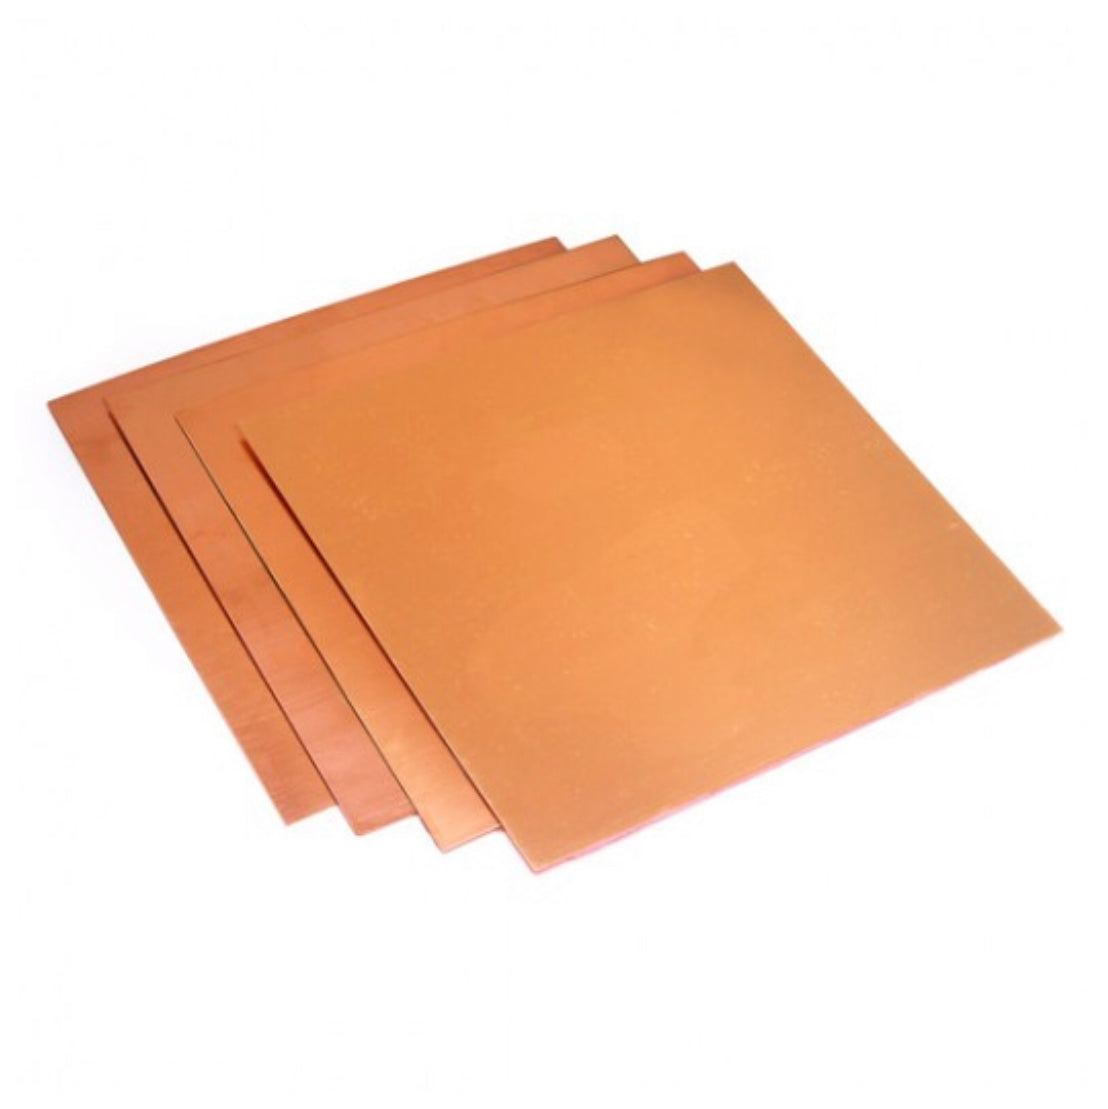 Copper Metal Sheet - 6 x 6 inches / 18g by Contenti - K. A. Artist Shop